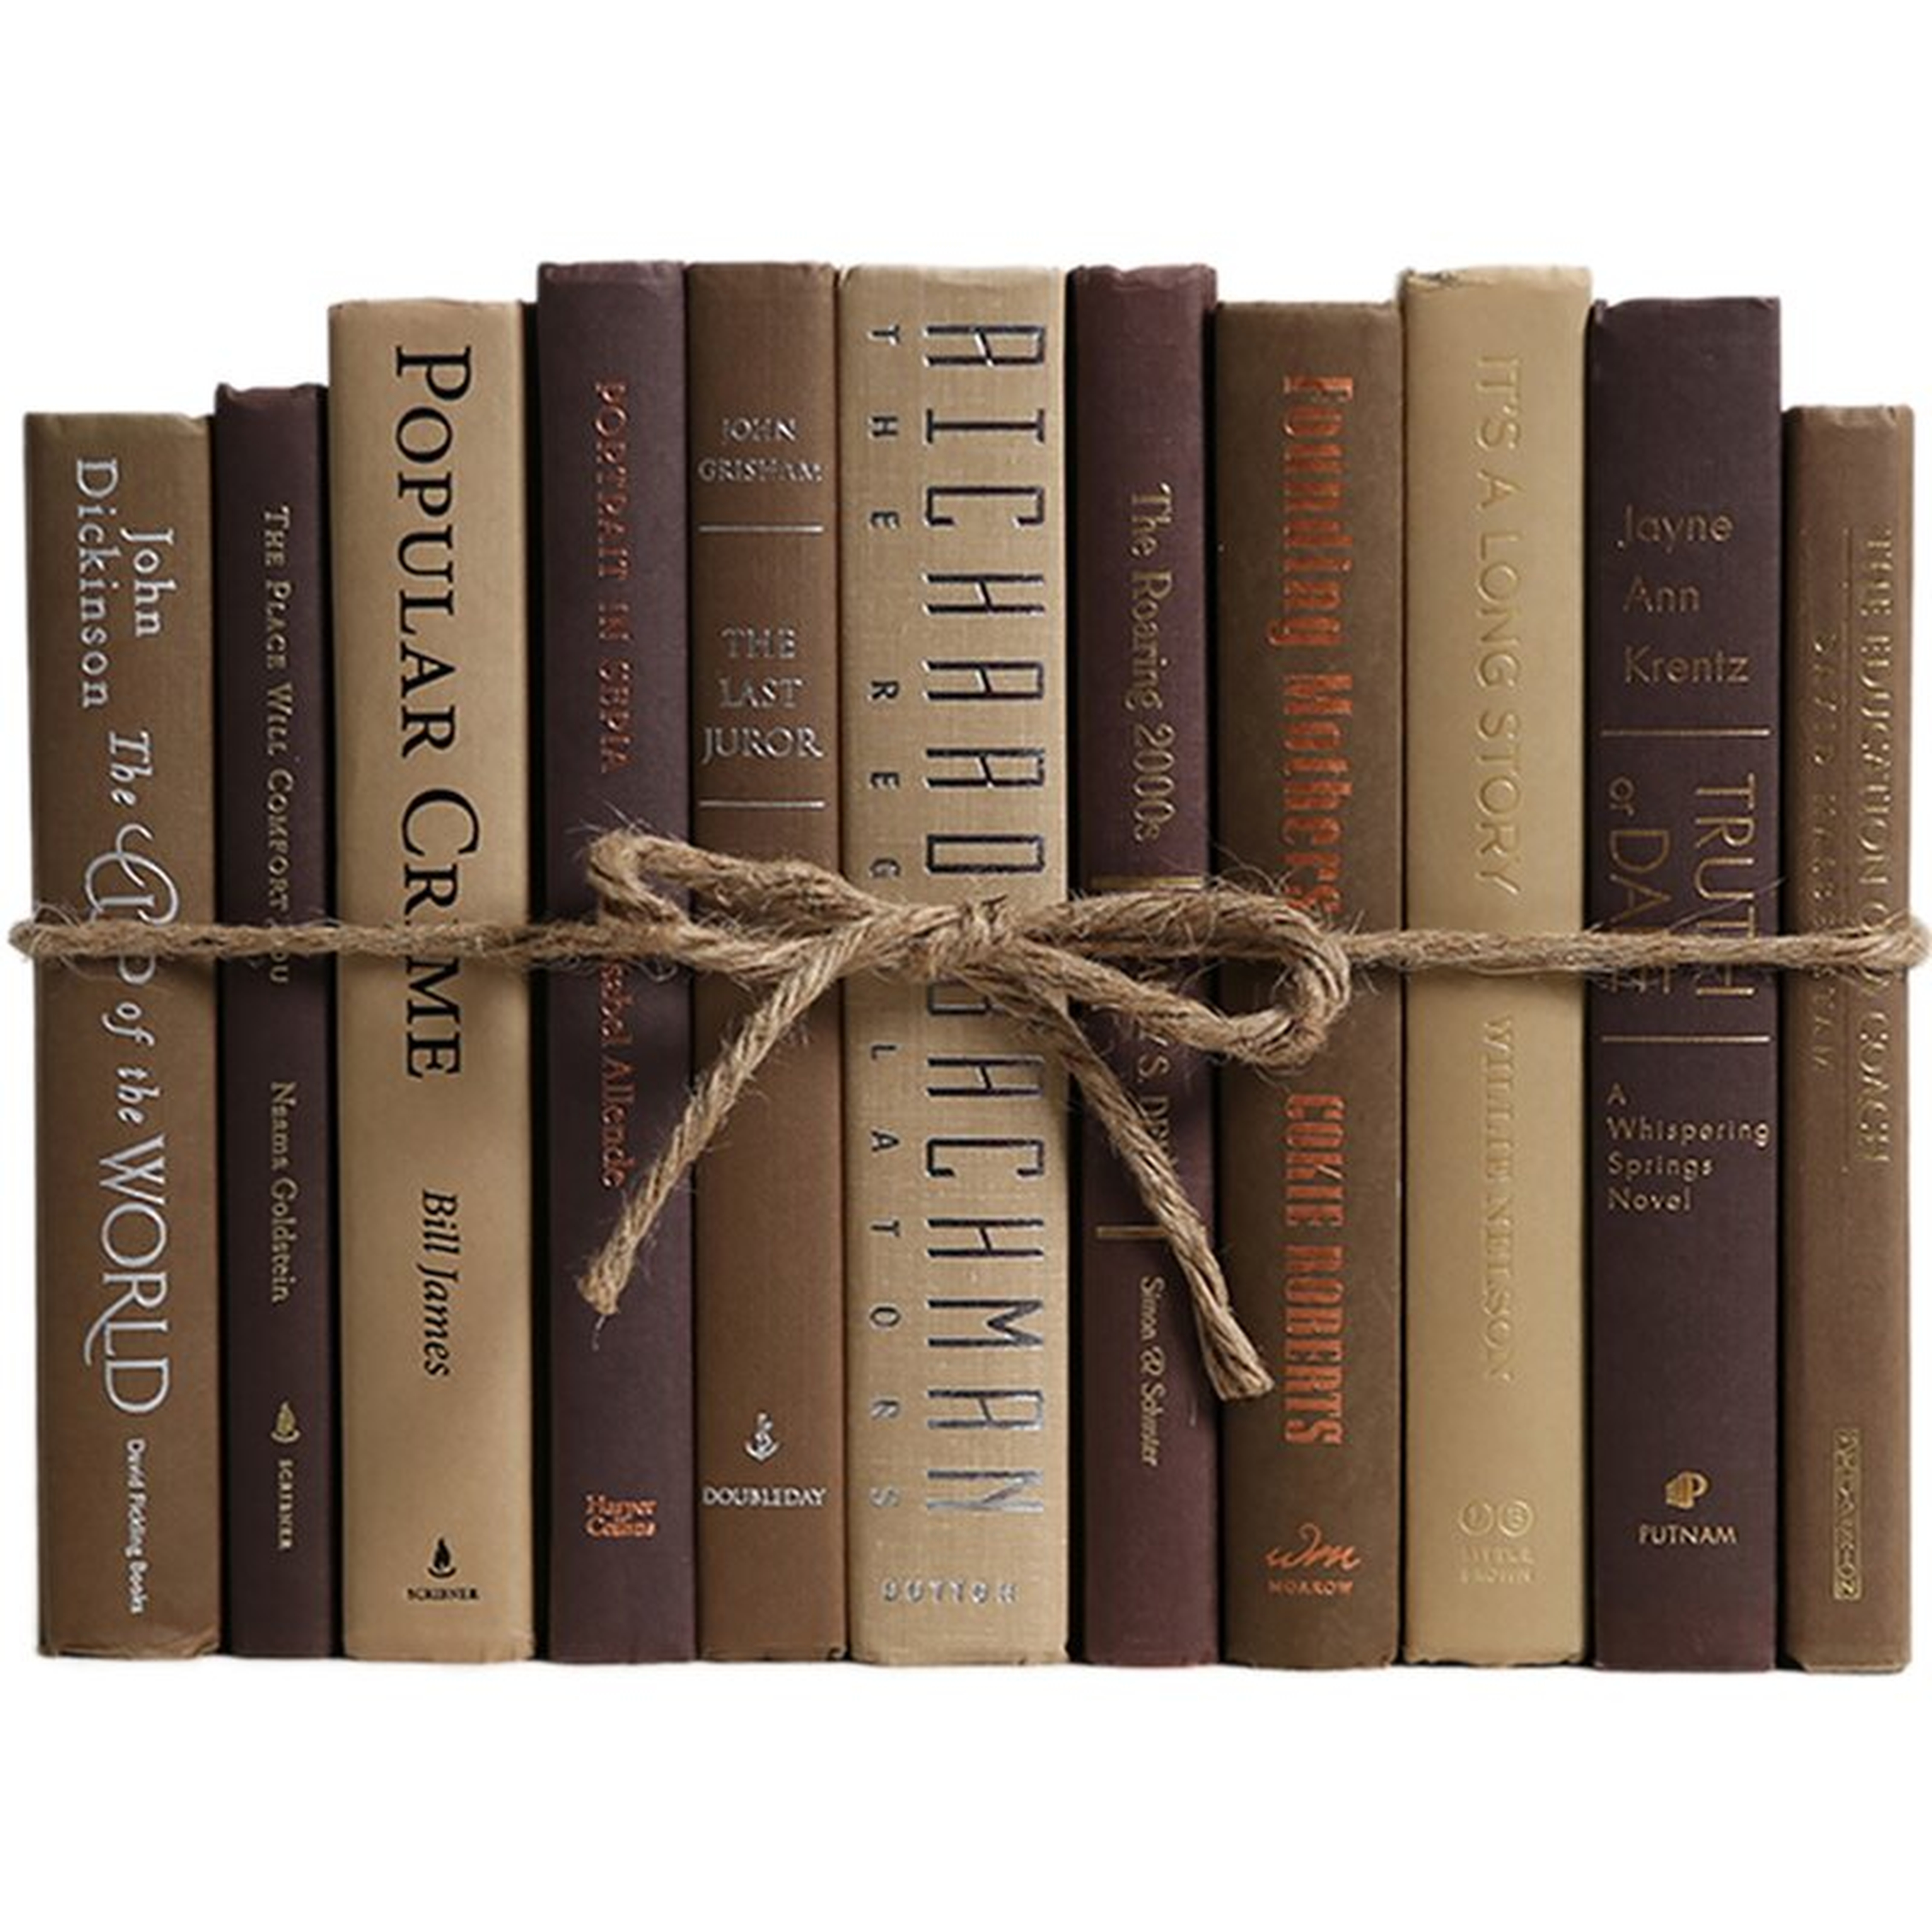 Booth & Williams Authentic Decorative Books - By Color Modern Chocolate ColorPak (1 Linear Foot, 10-12 Books) - Perigold